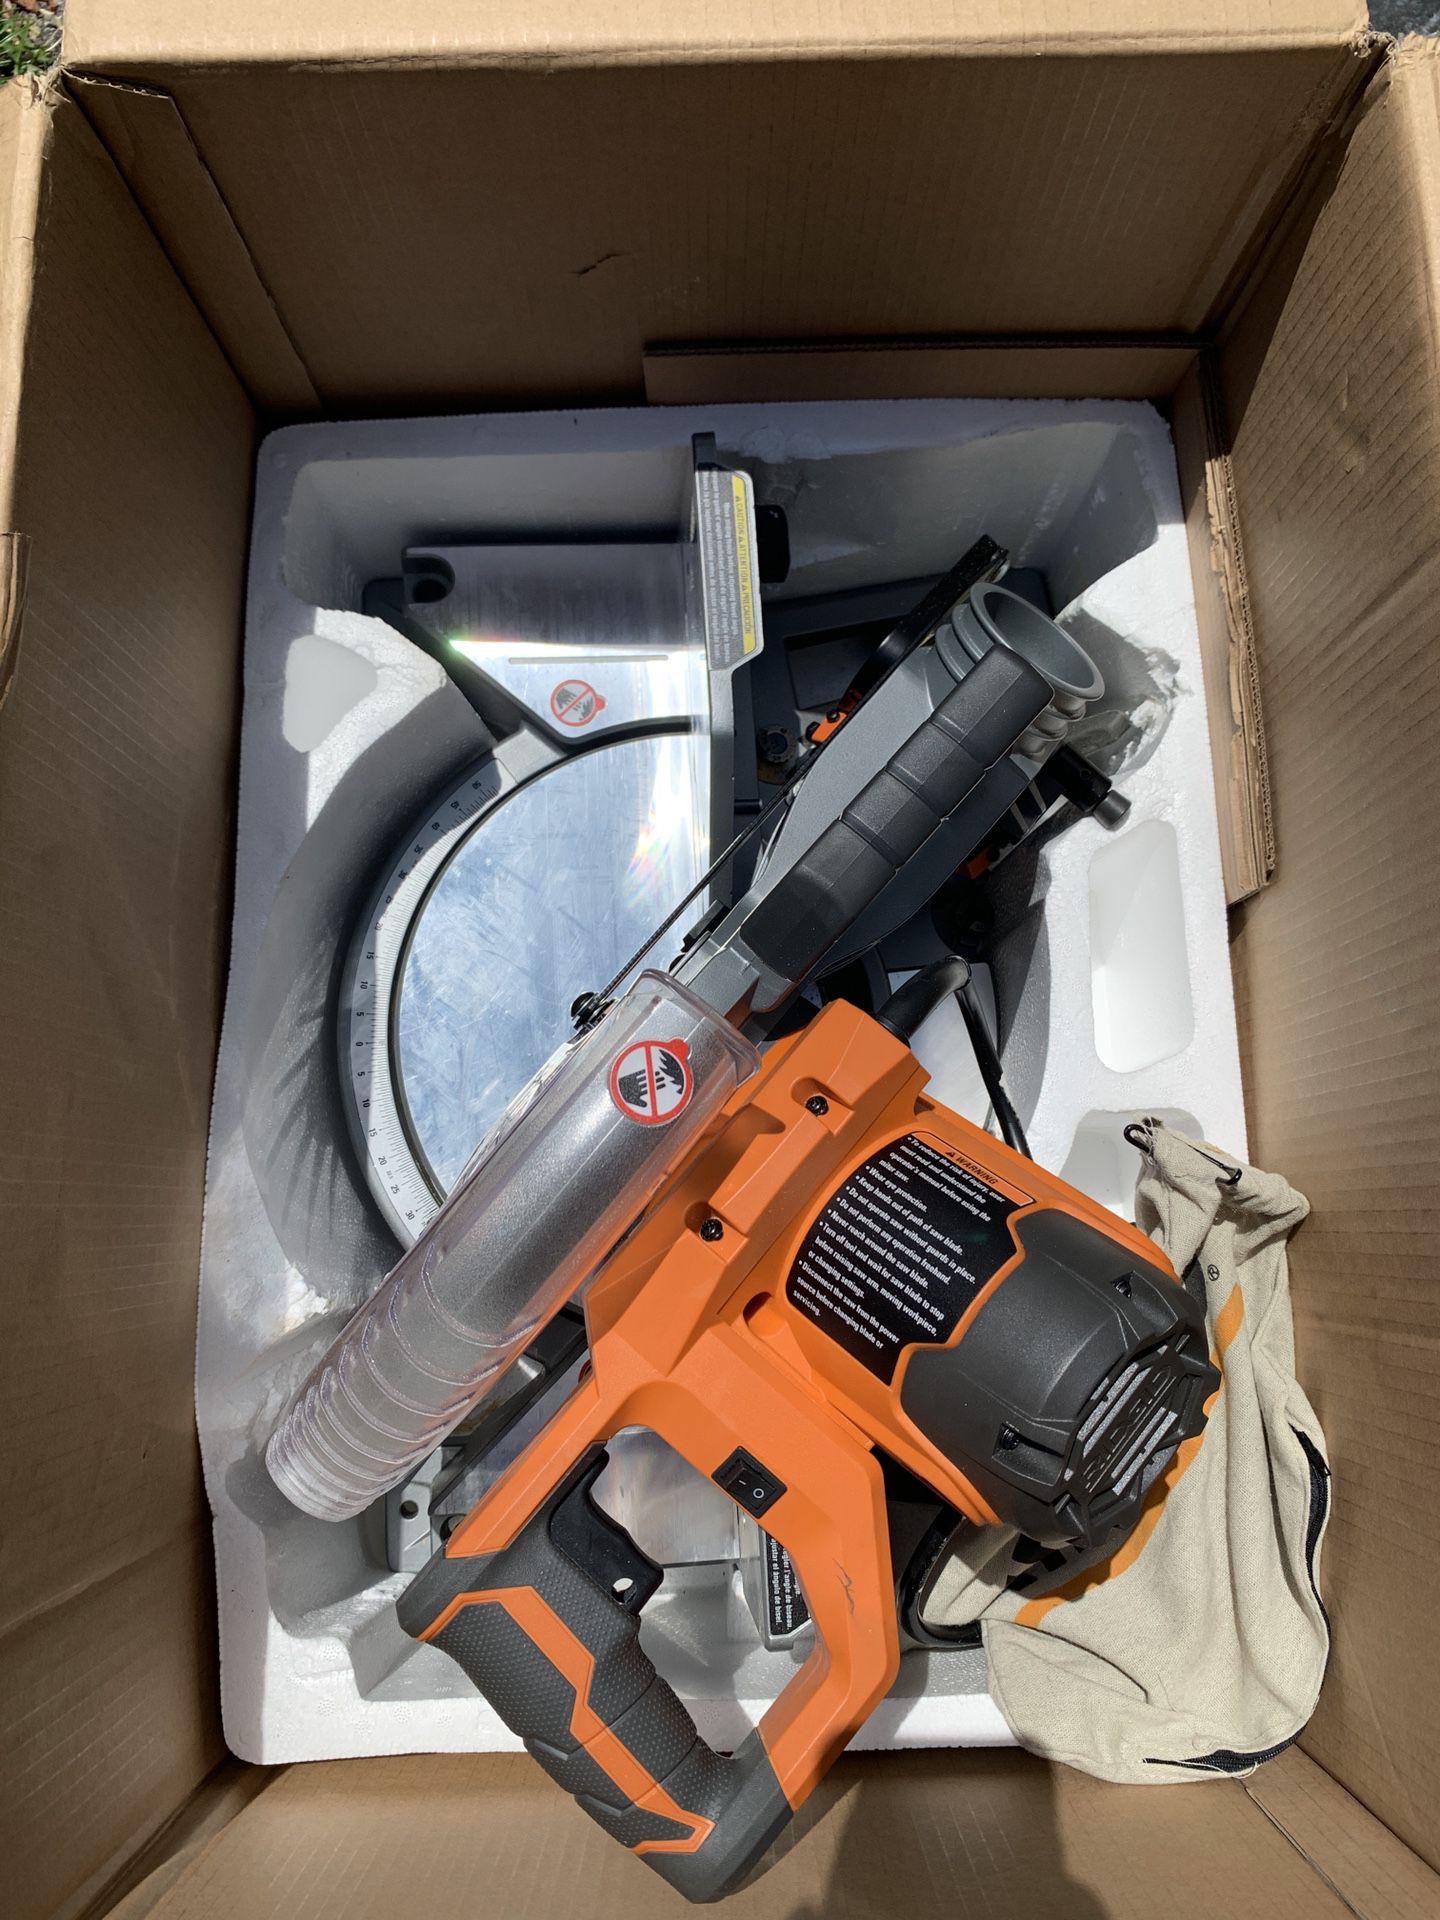 Miter saw 10 inches double bevel Ridgid